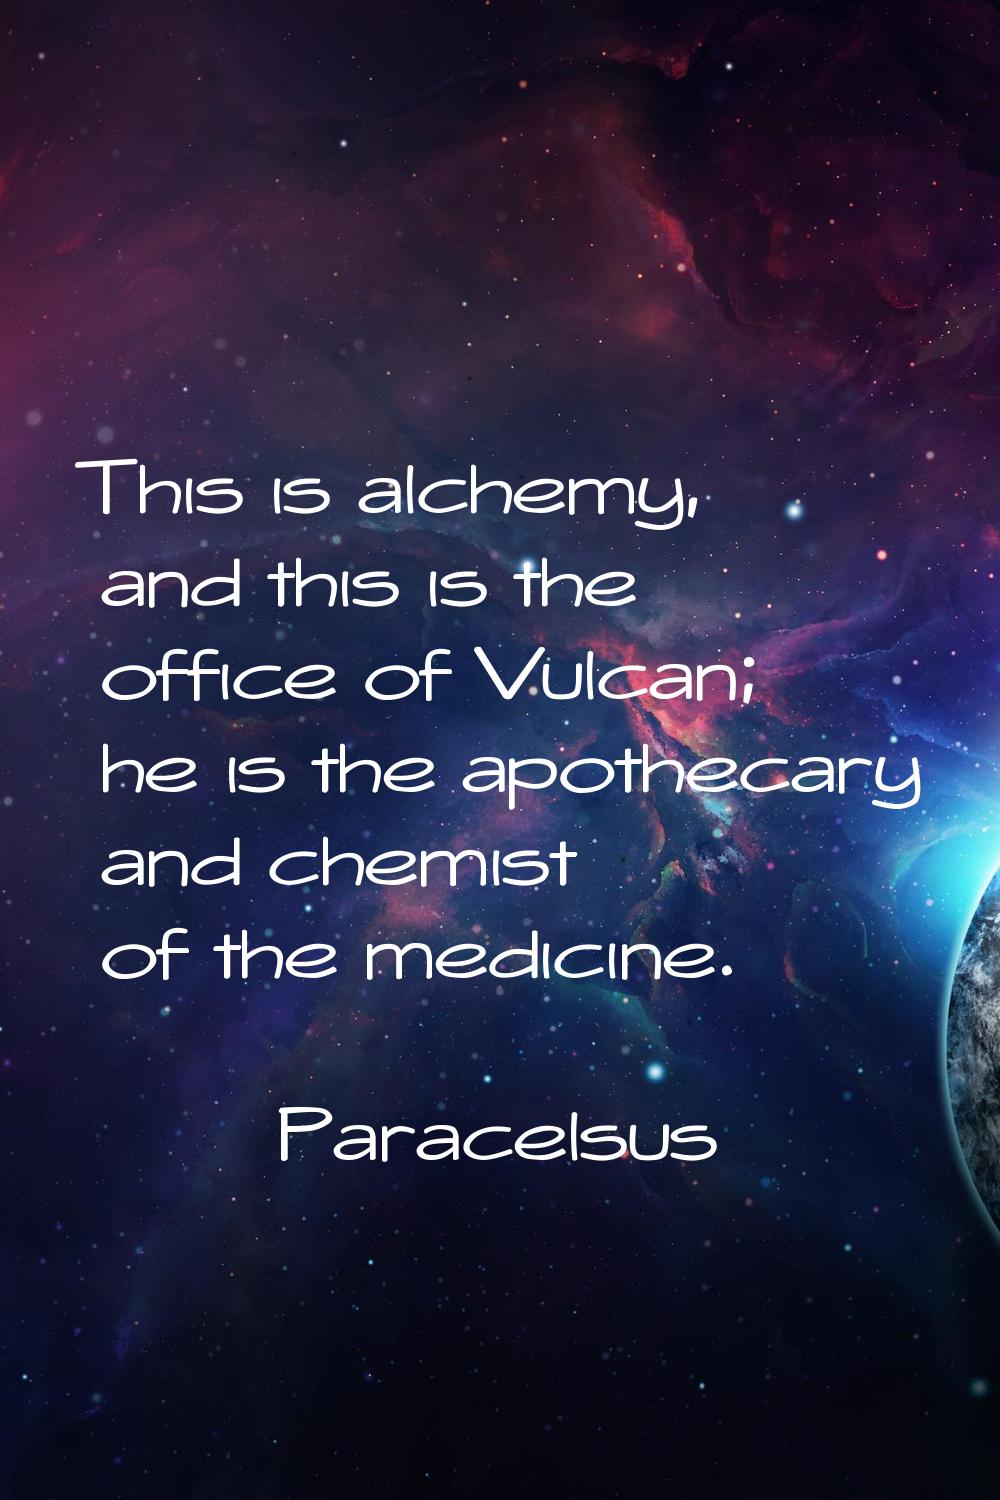 This is alchemy, and this is the office of Vulcan; he is the apothecary and chemist of the medicine